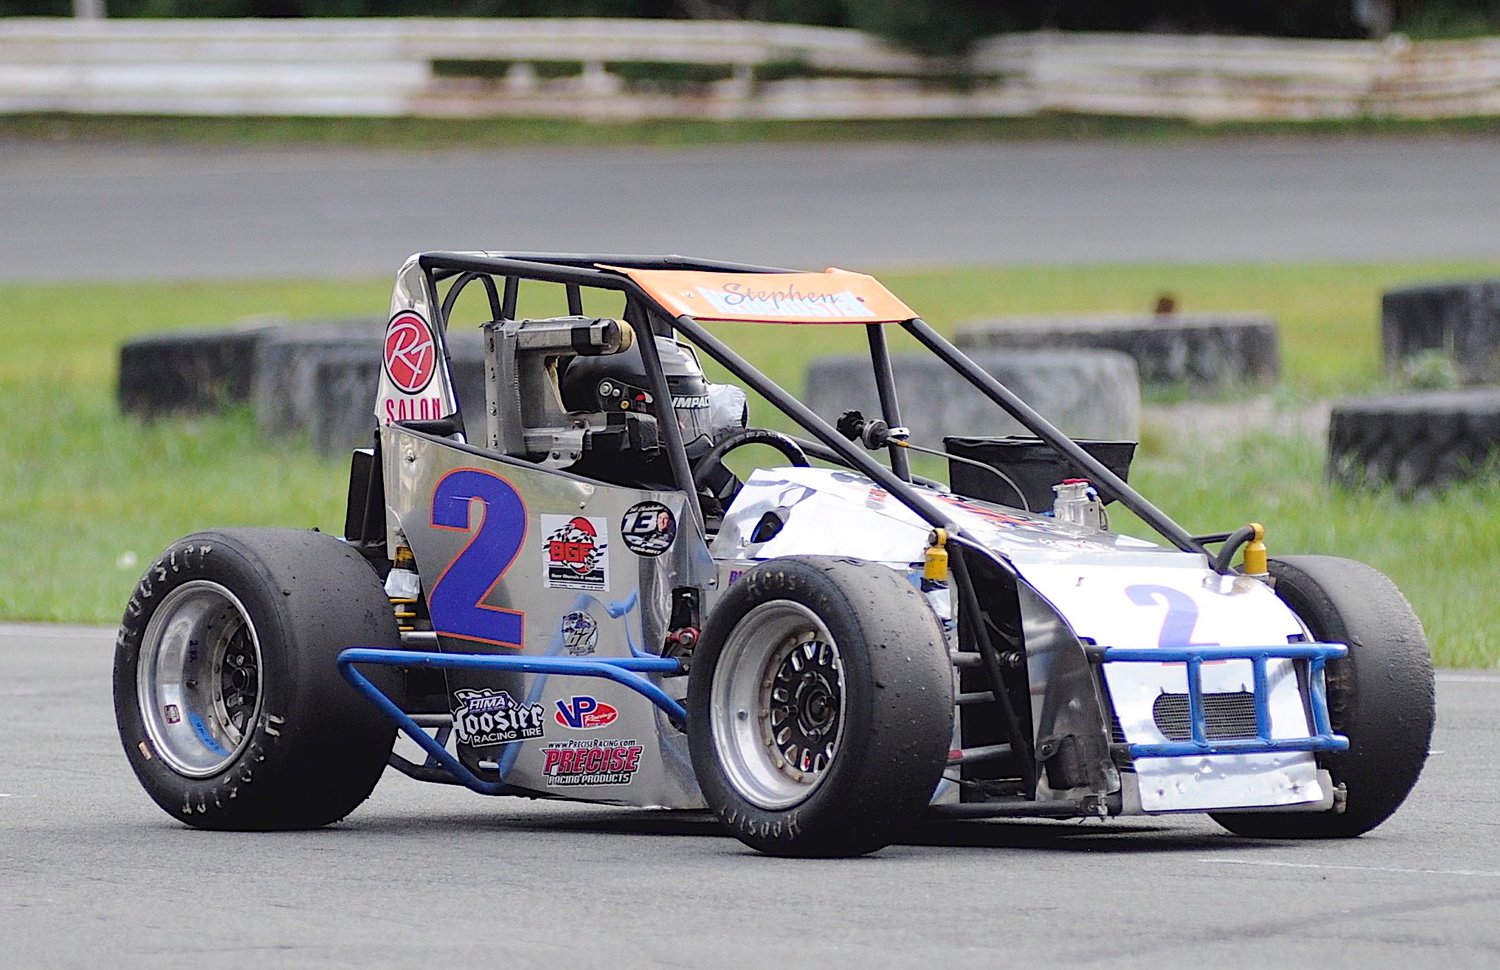 Headed to the record books. Steve Nederostek in the “Silver Bullet” took “gold” in the modern TQ midget feature, narrowly edging second-place finisher Tyler Wagner and Chris Hirt, who came in third at the checkered flag.